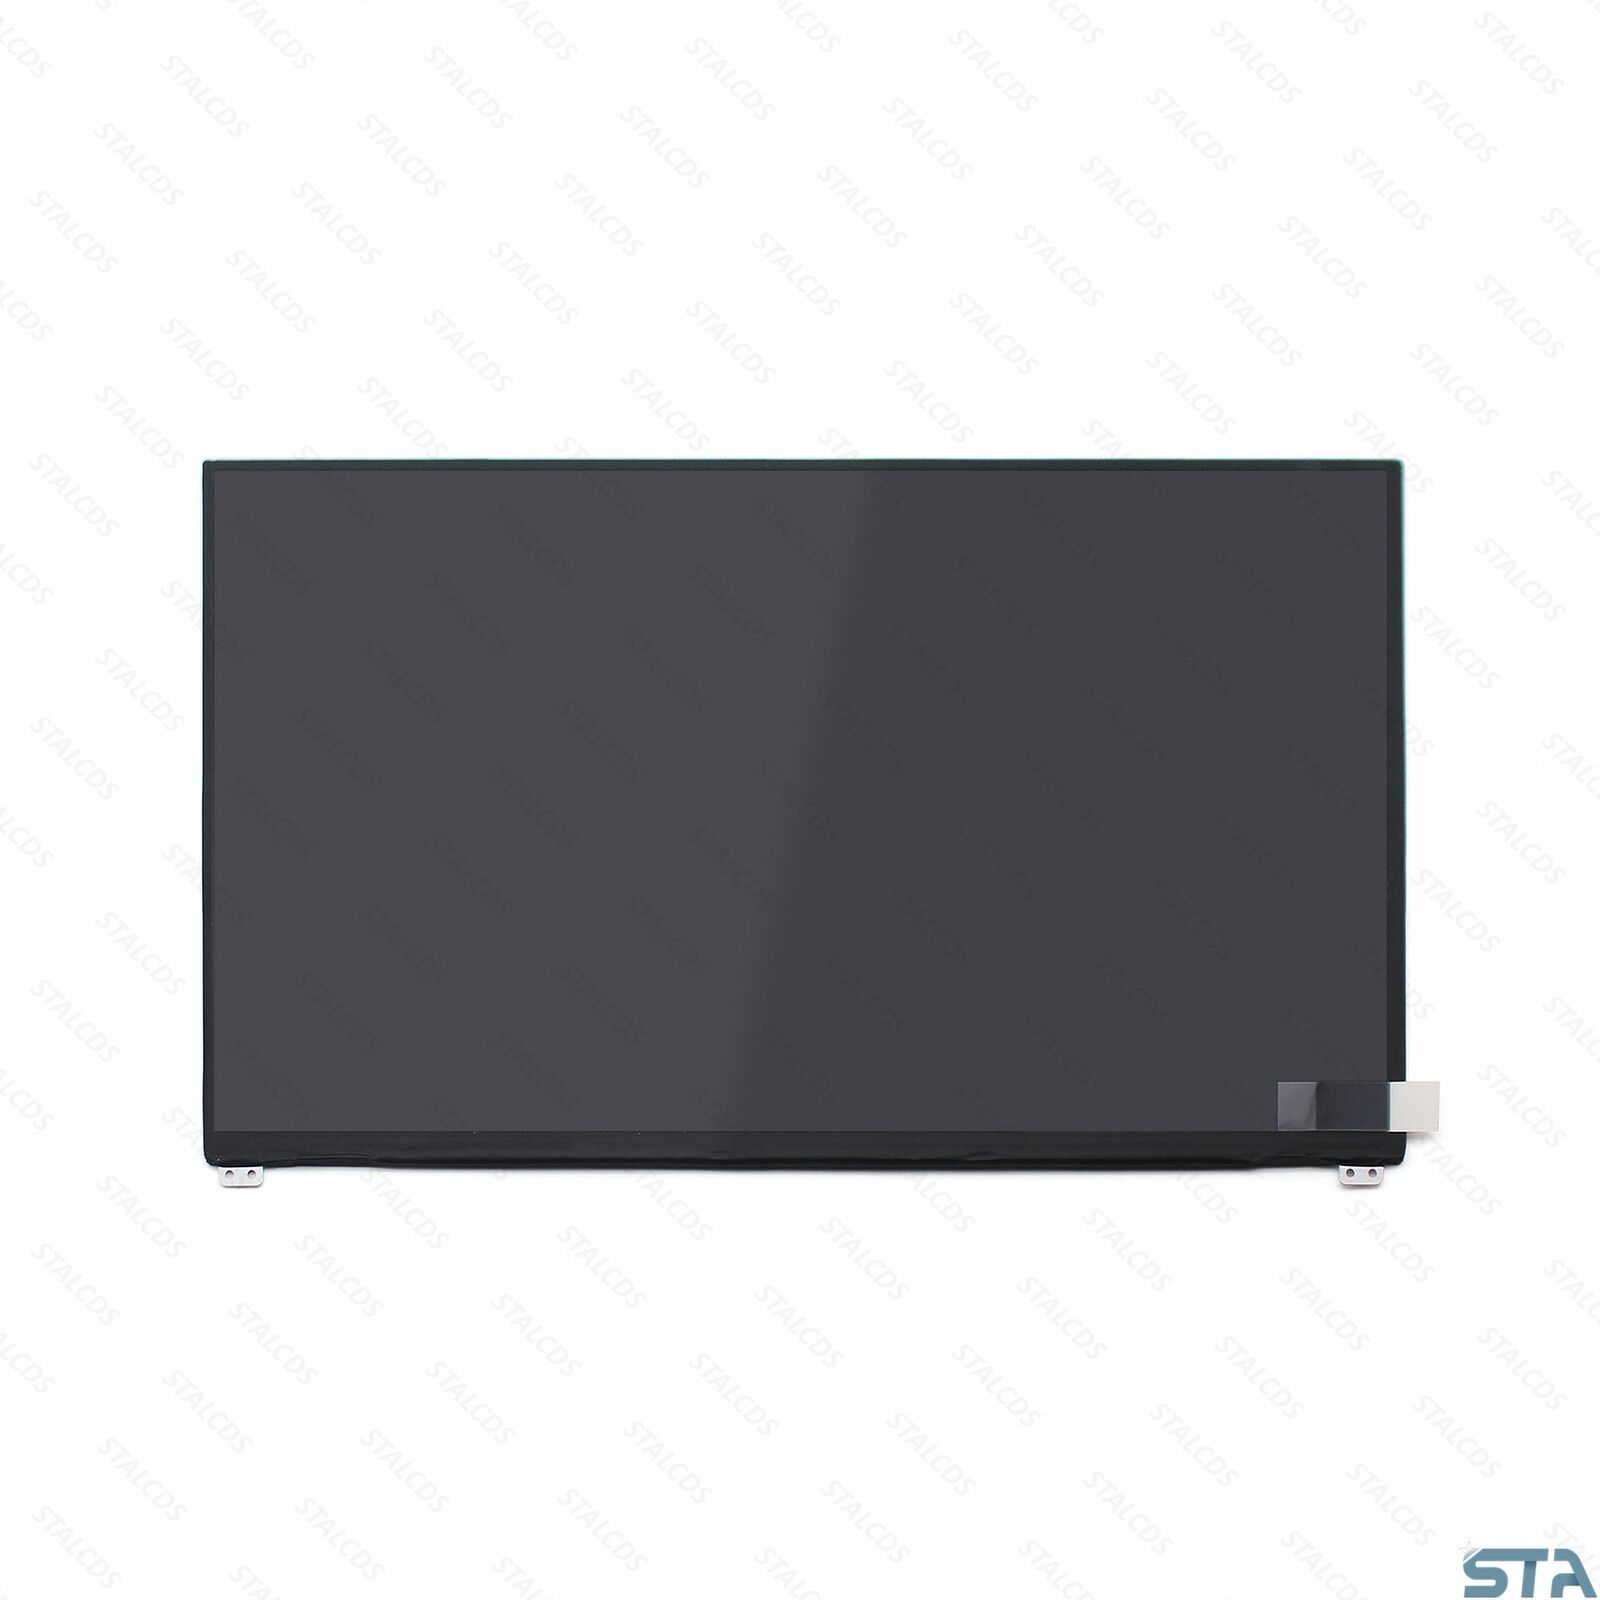 LCD Screen Display Panel for Dell Latitude 7480 7490 KGYYH 48DGW 6HY1W 1080P